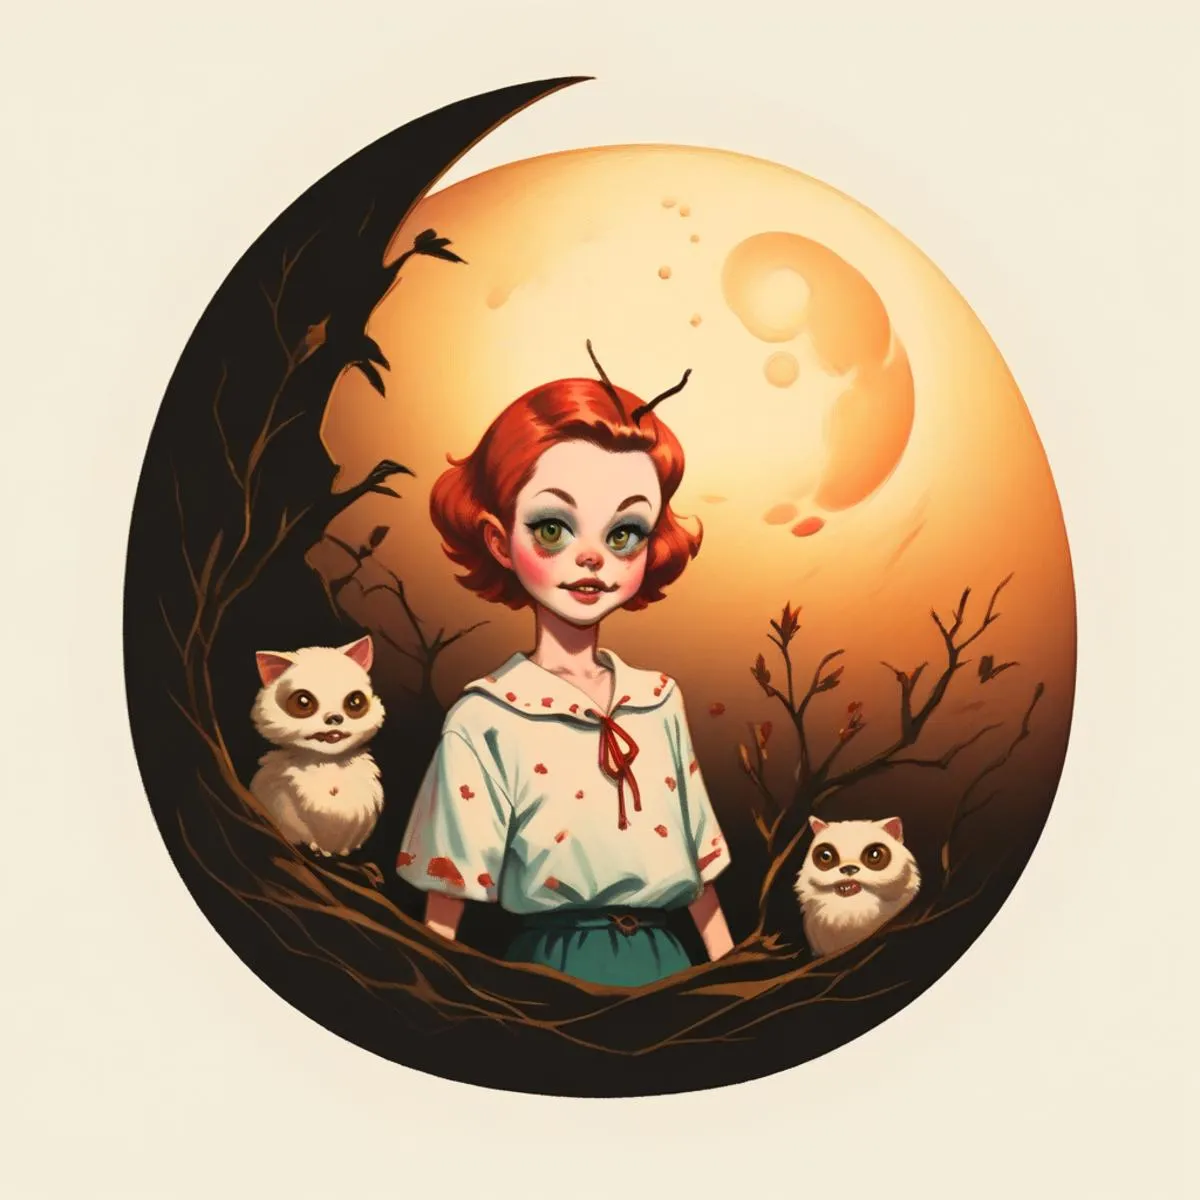 AI generated image of a girl with red hair, surrounded by two cats and a full moon background, created using Stable Diffusion.